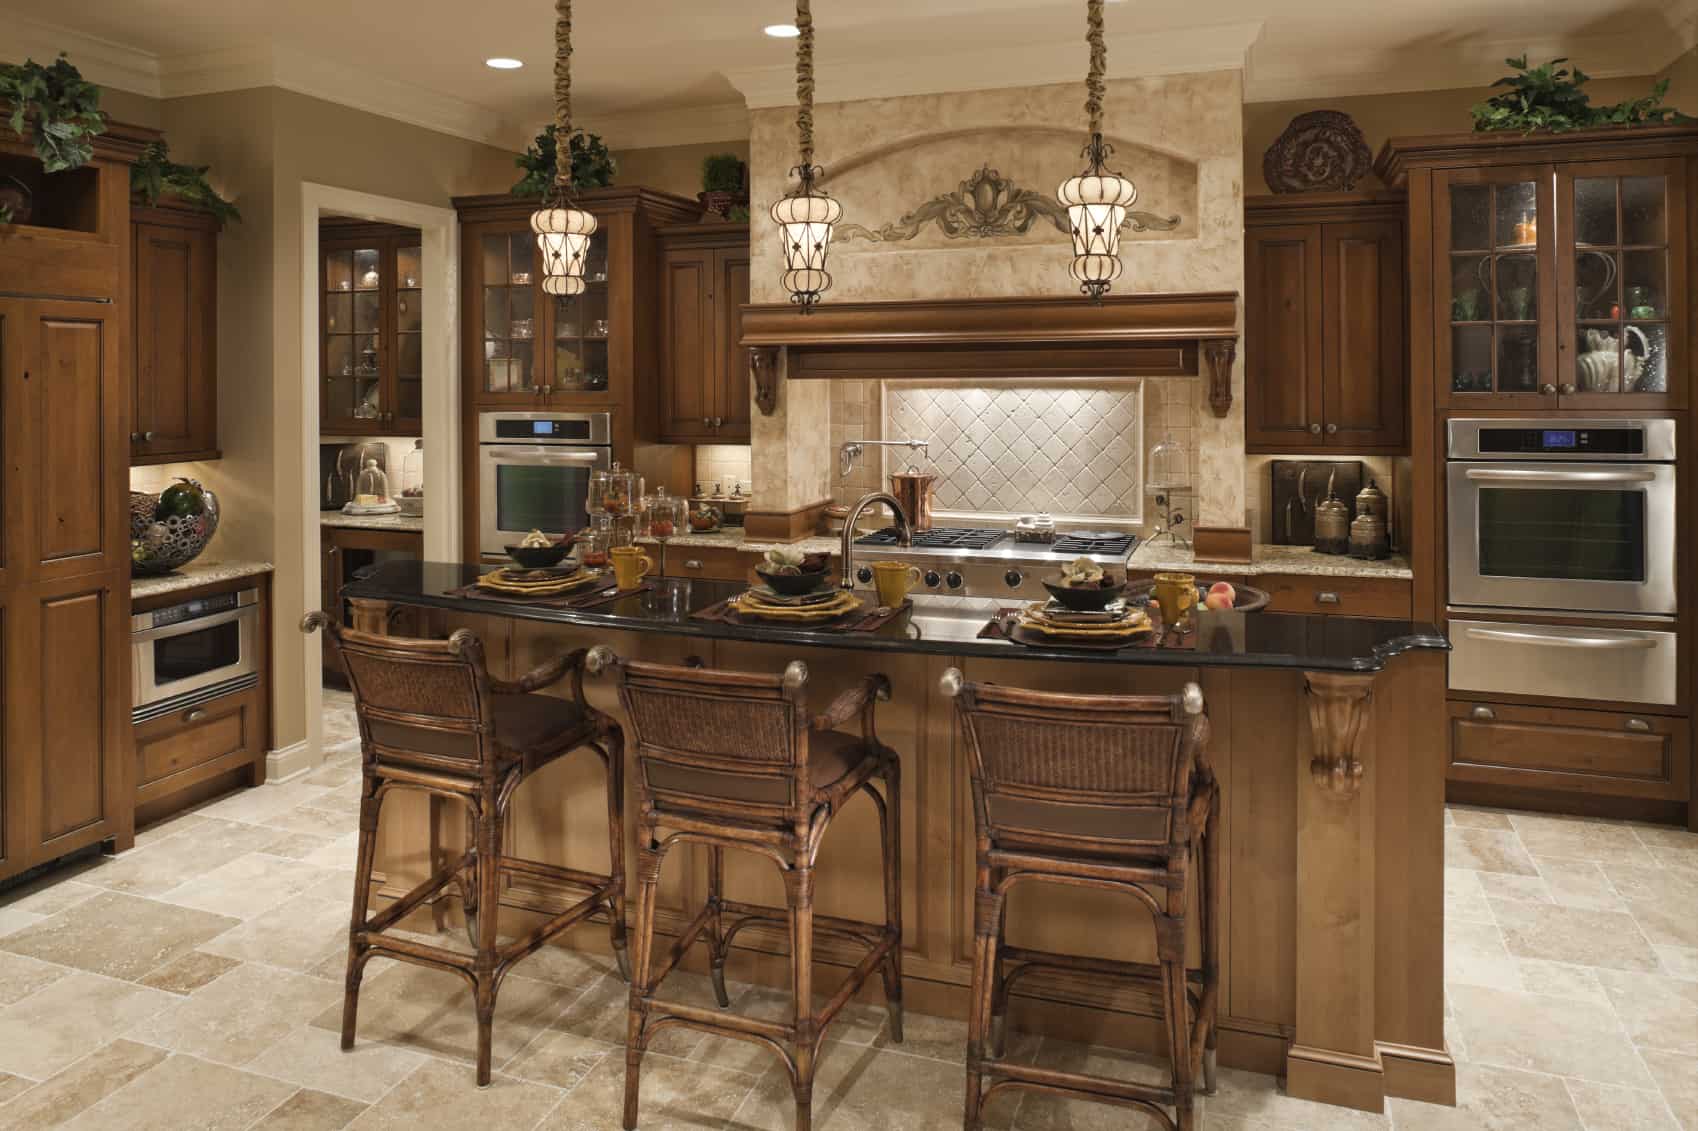 The large wooden island is the center of this kitchen. The thin layer of black marble countertop creates a contrast from the tiles floor of beige color.